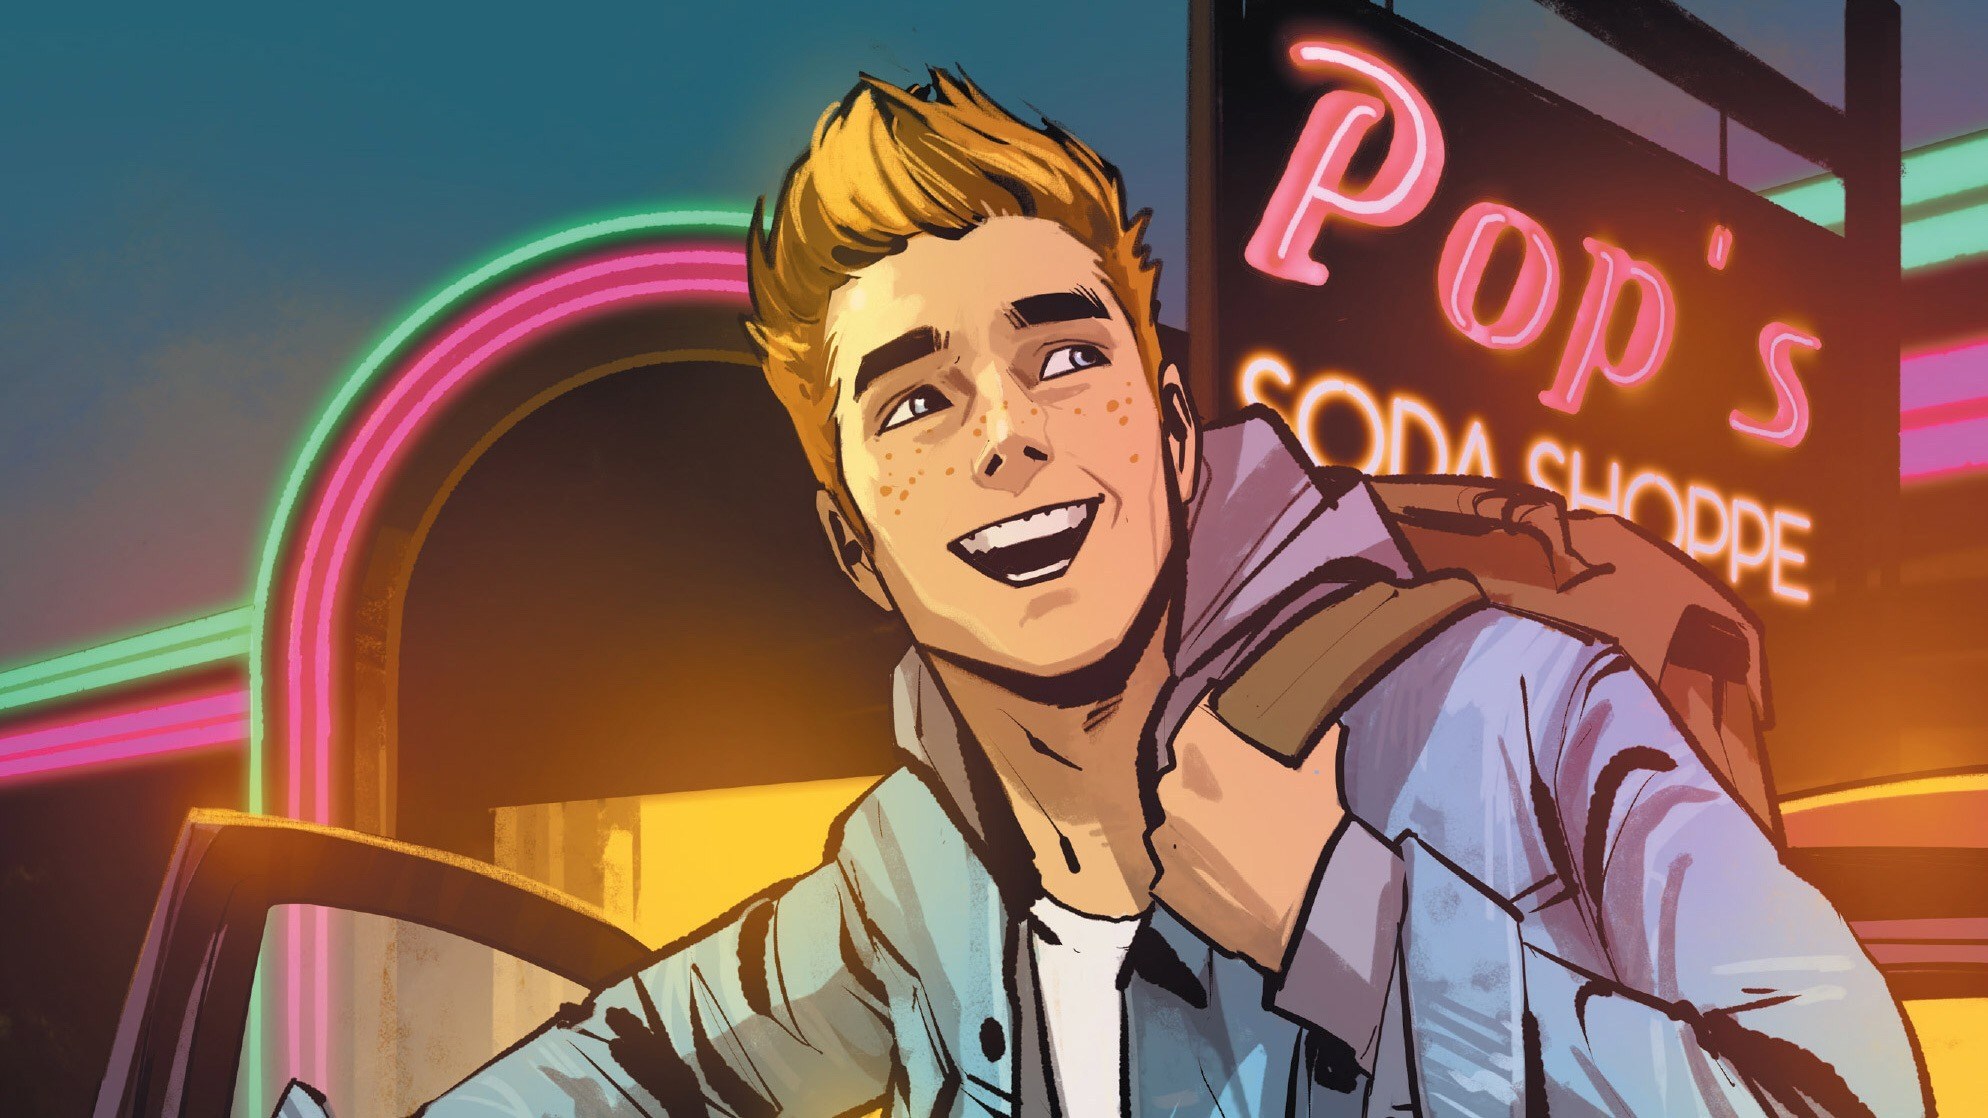 Archie #1 (Page 3): Archie introduces himself in this comedy comic.